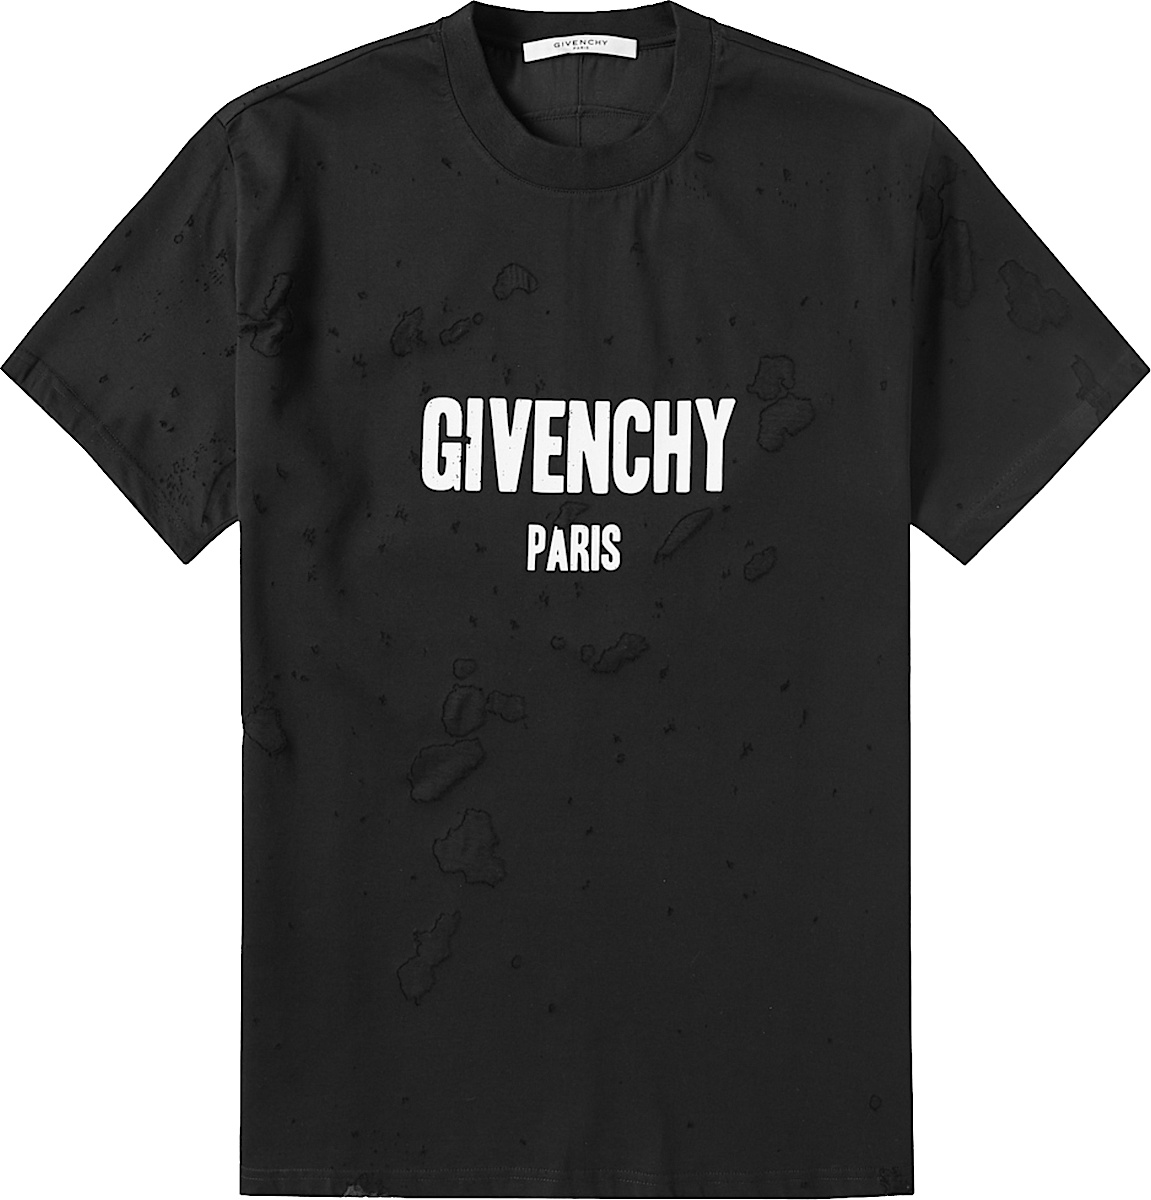 Givenchy Black Destroyed 'Givenchy Paris' T-Shirt | INC STYLE